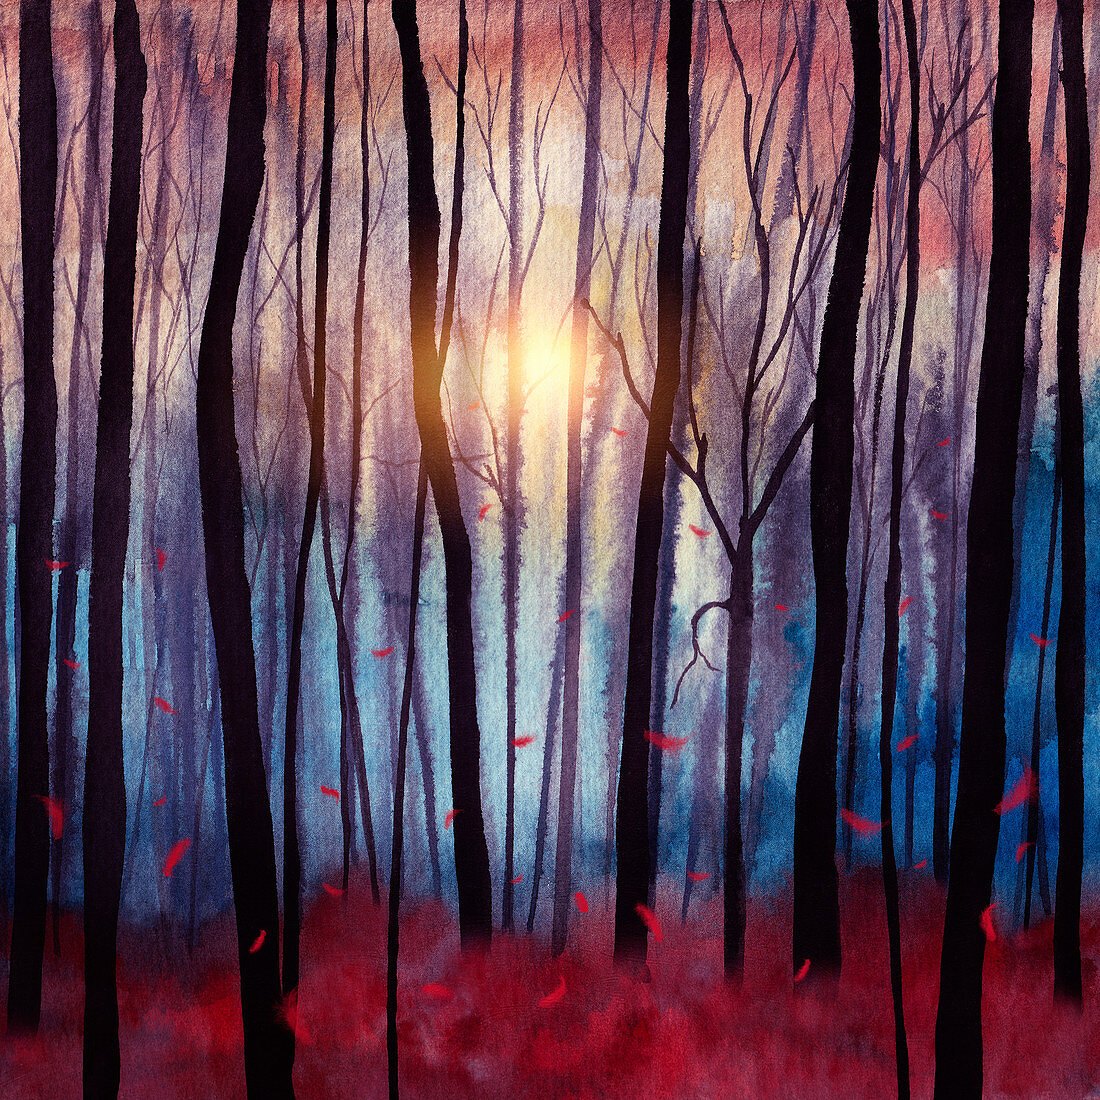 Red feathers falling in a forest, illustration